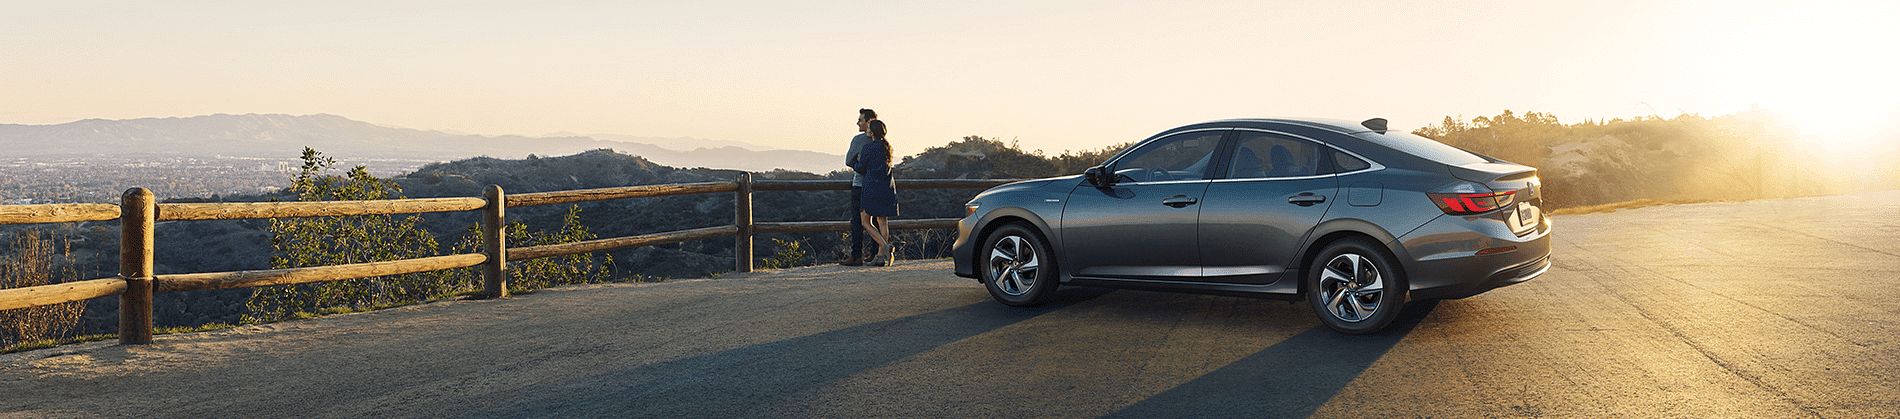 Honda car parked on the edge of a cliff and two people hugging each other admiring the views